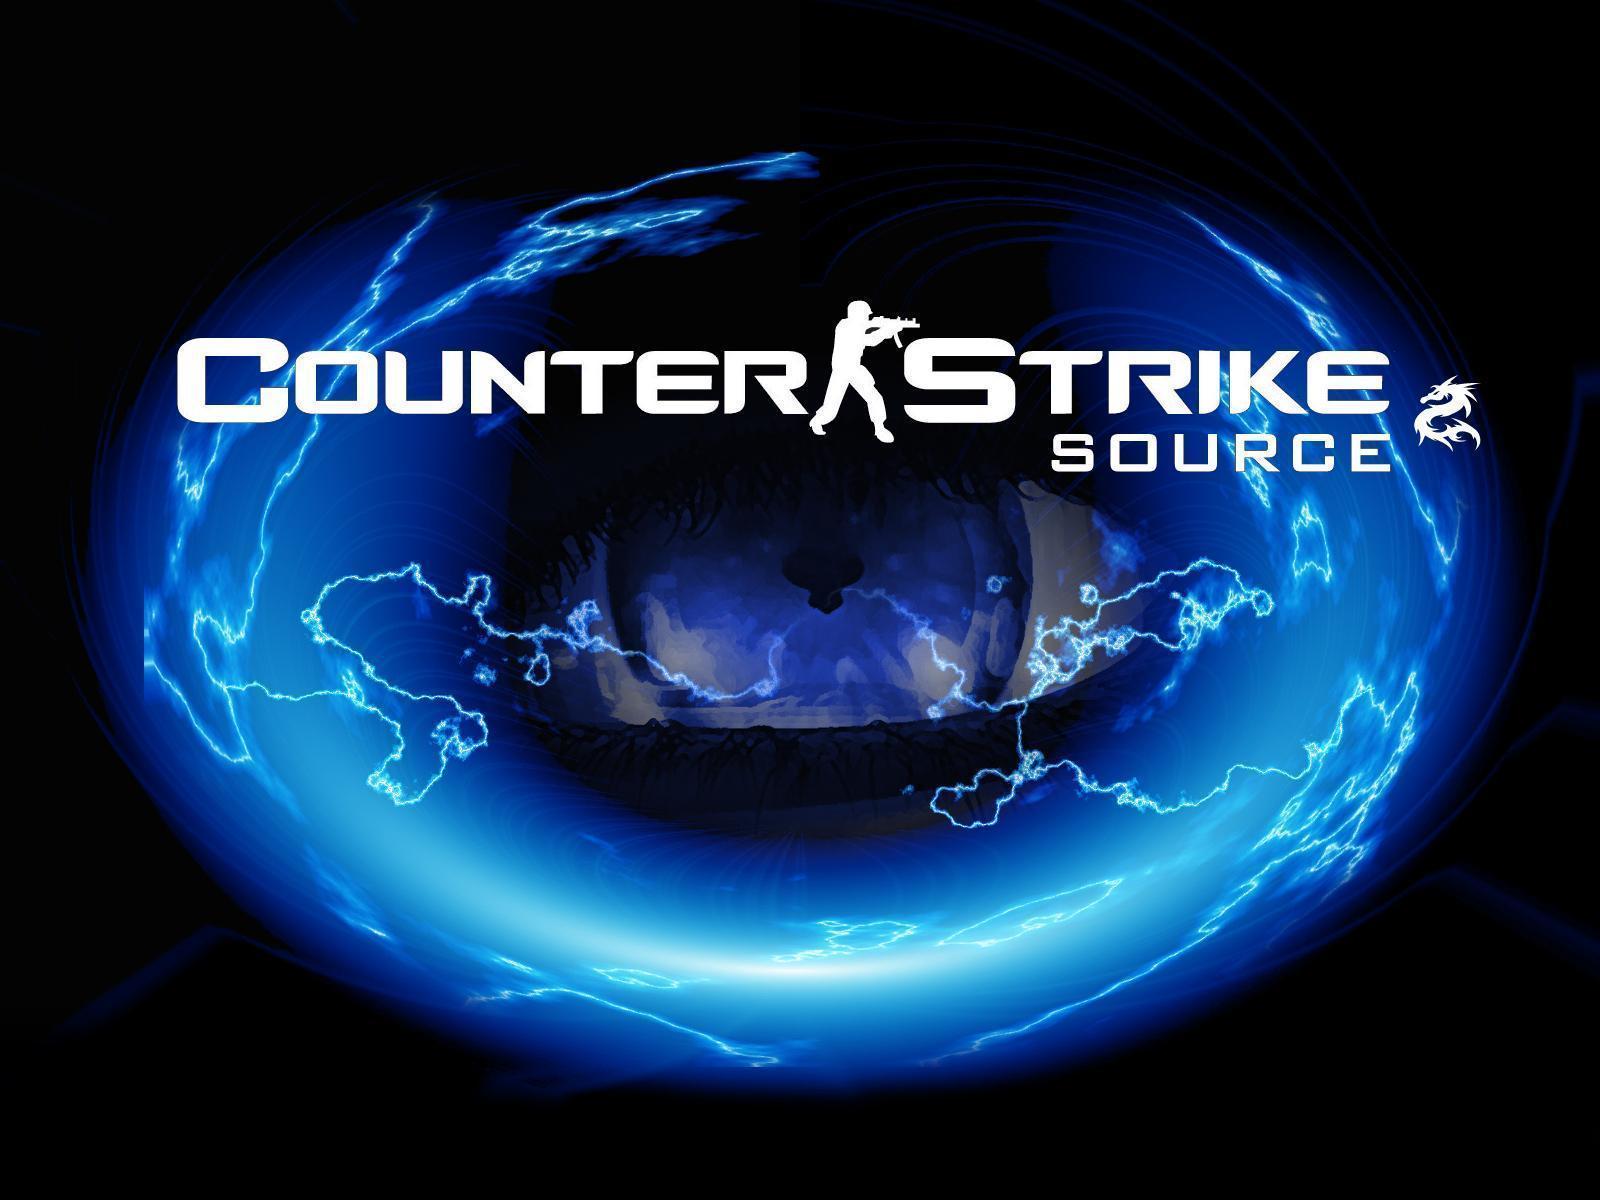 Counter-Strike Source Wallpapers | HD Wallpapers Base